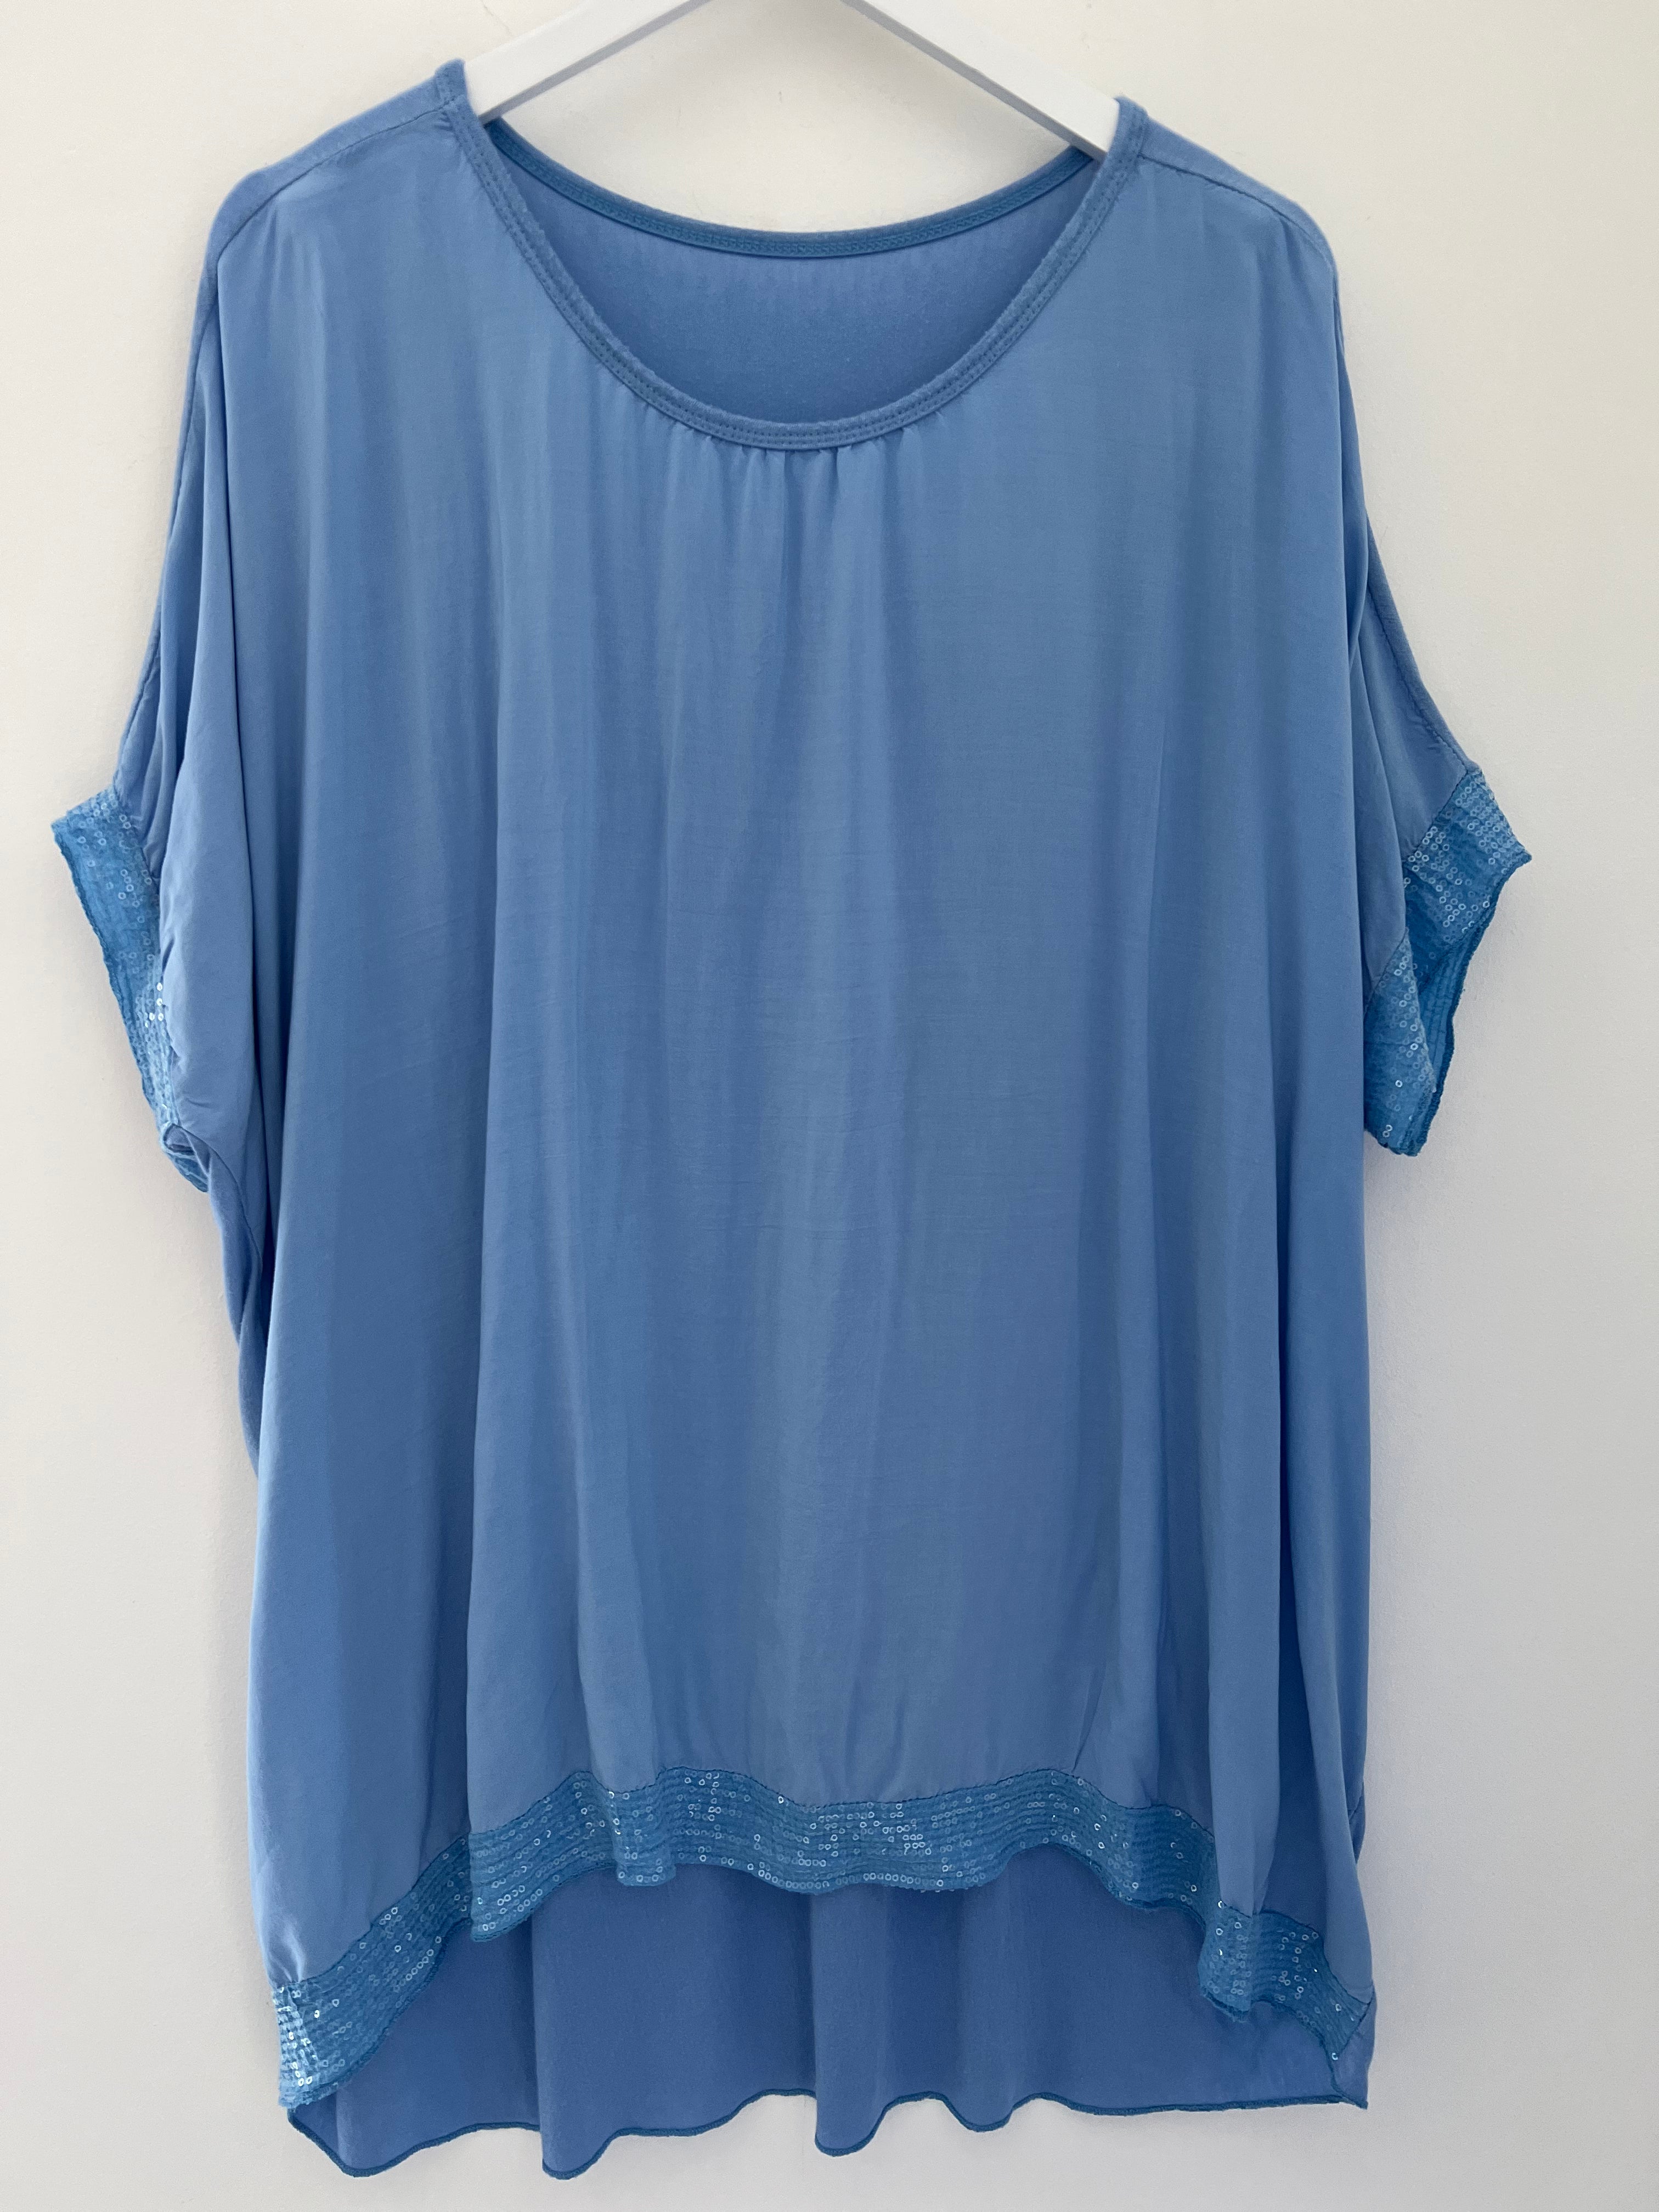 Oversized Sequin Top in Soft Blue